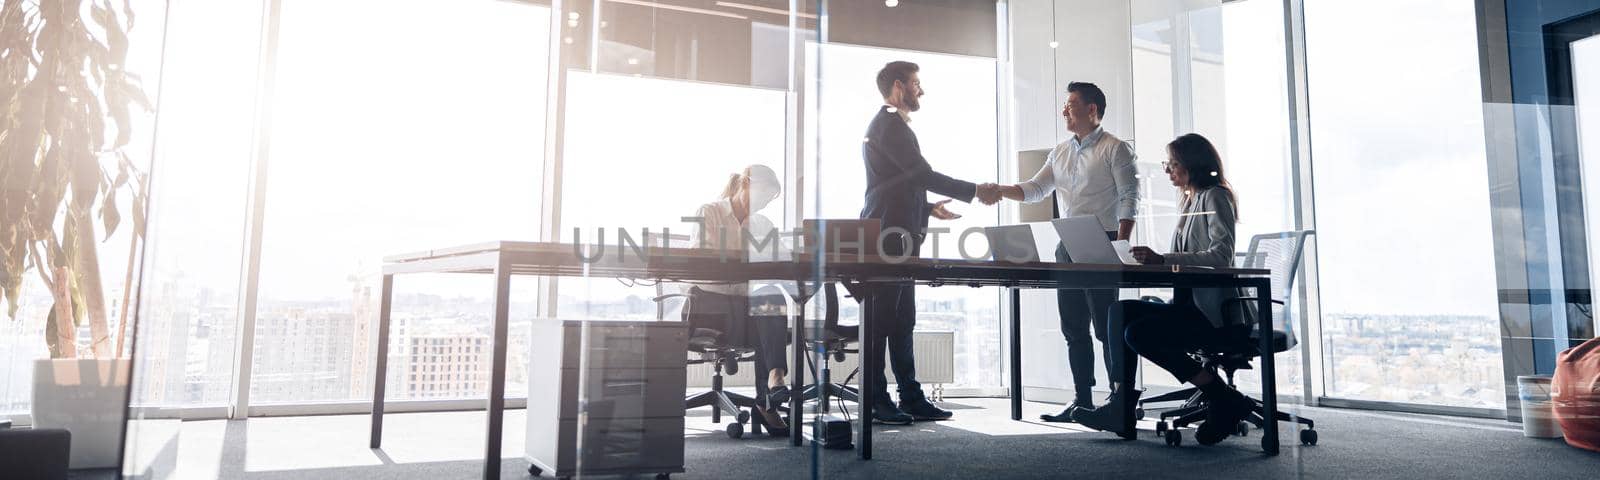 Team of young businessmen working and communicating together in office. Blurred background